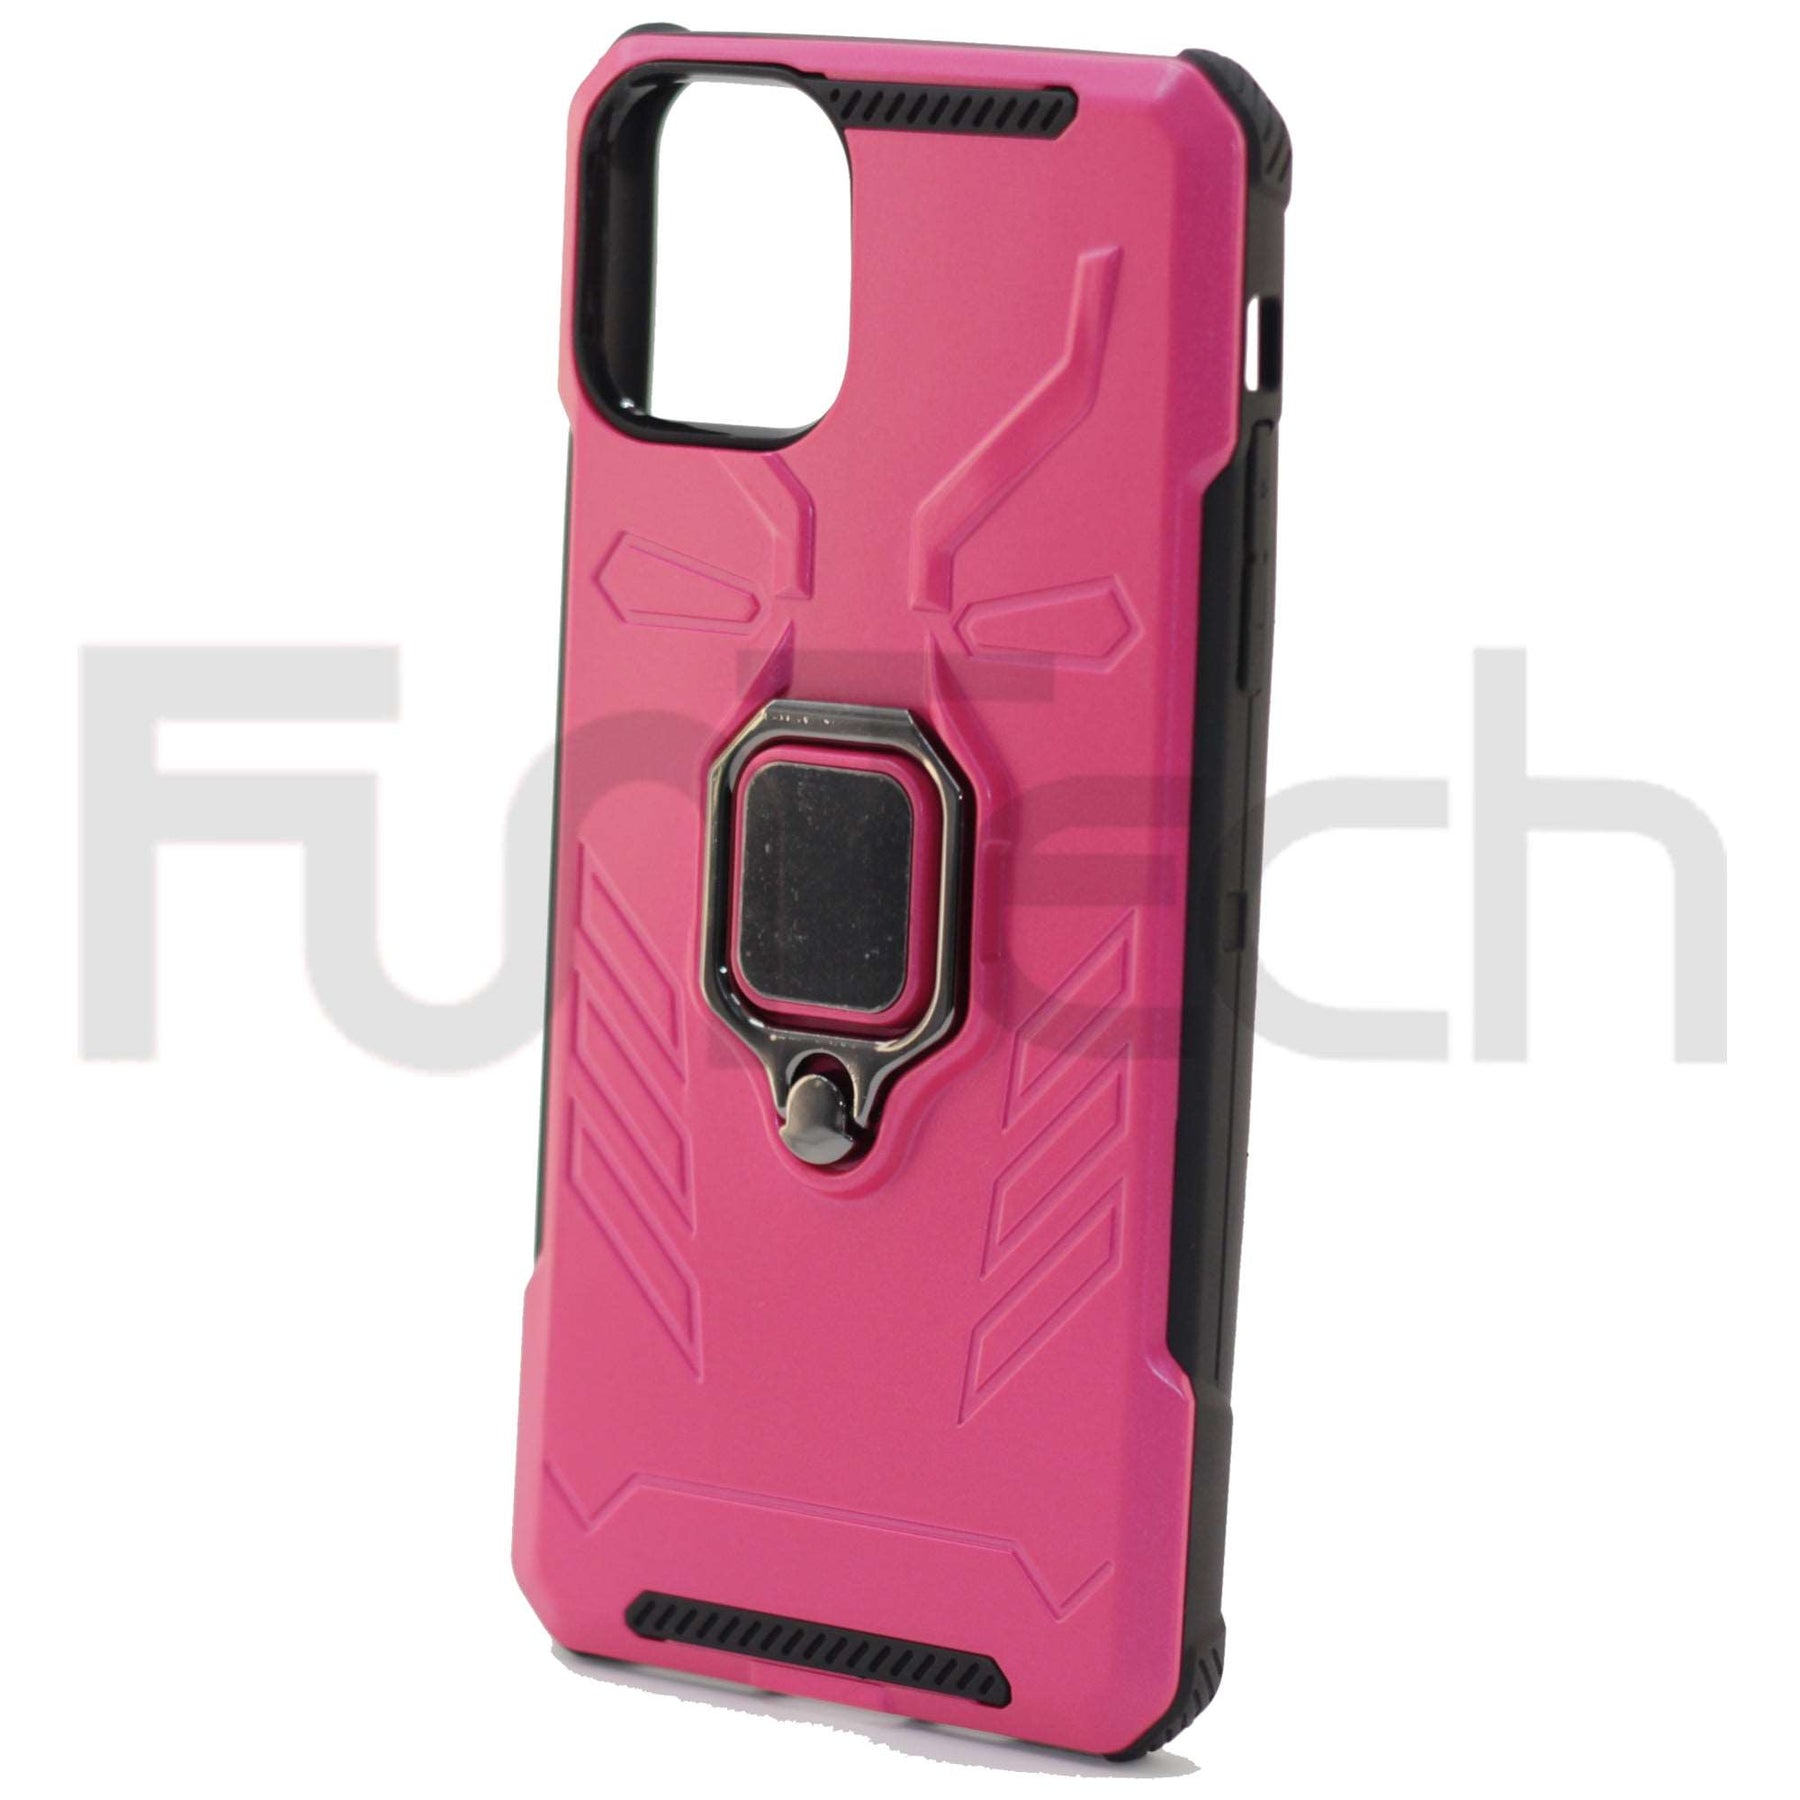 Apple iPhone 11 Pro MAX, Ring Armor Case, Color Pink,